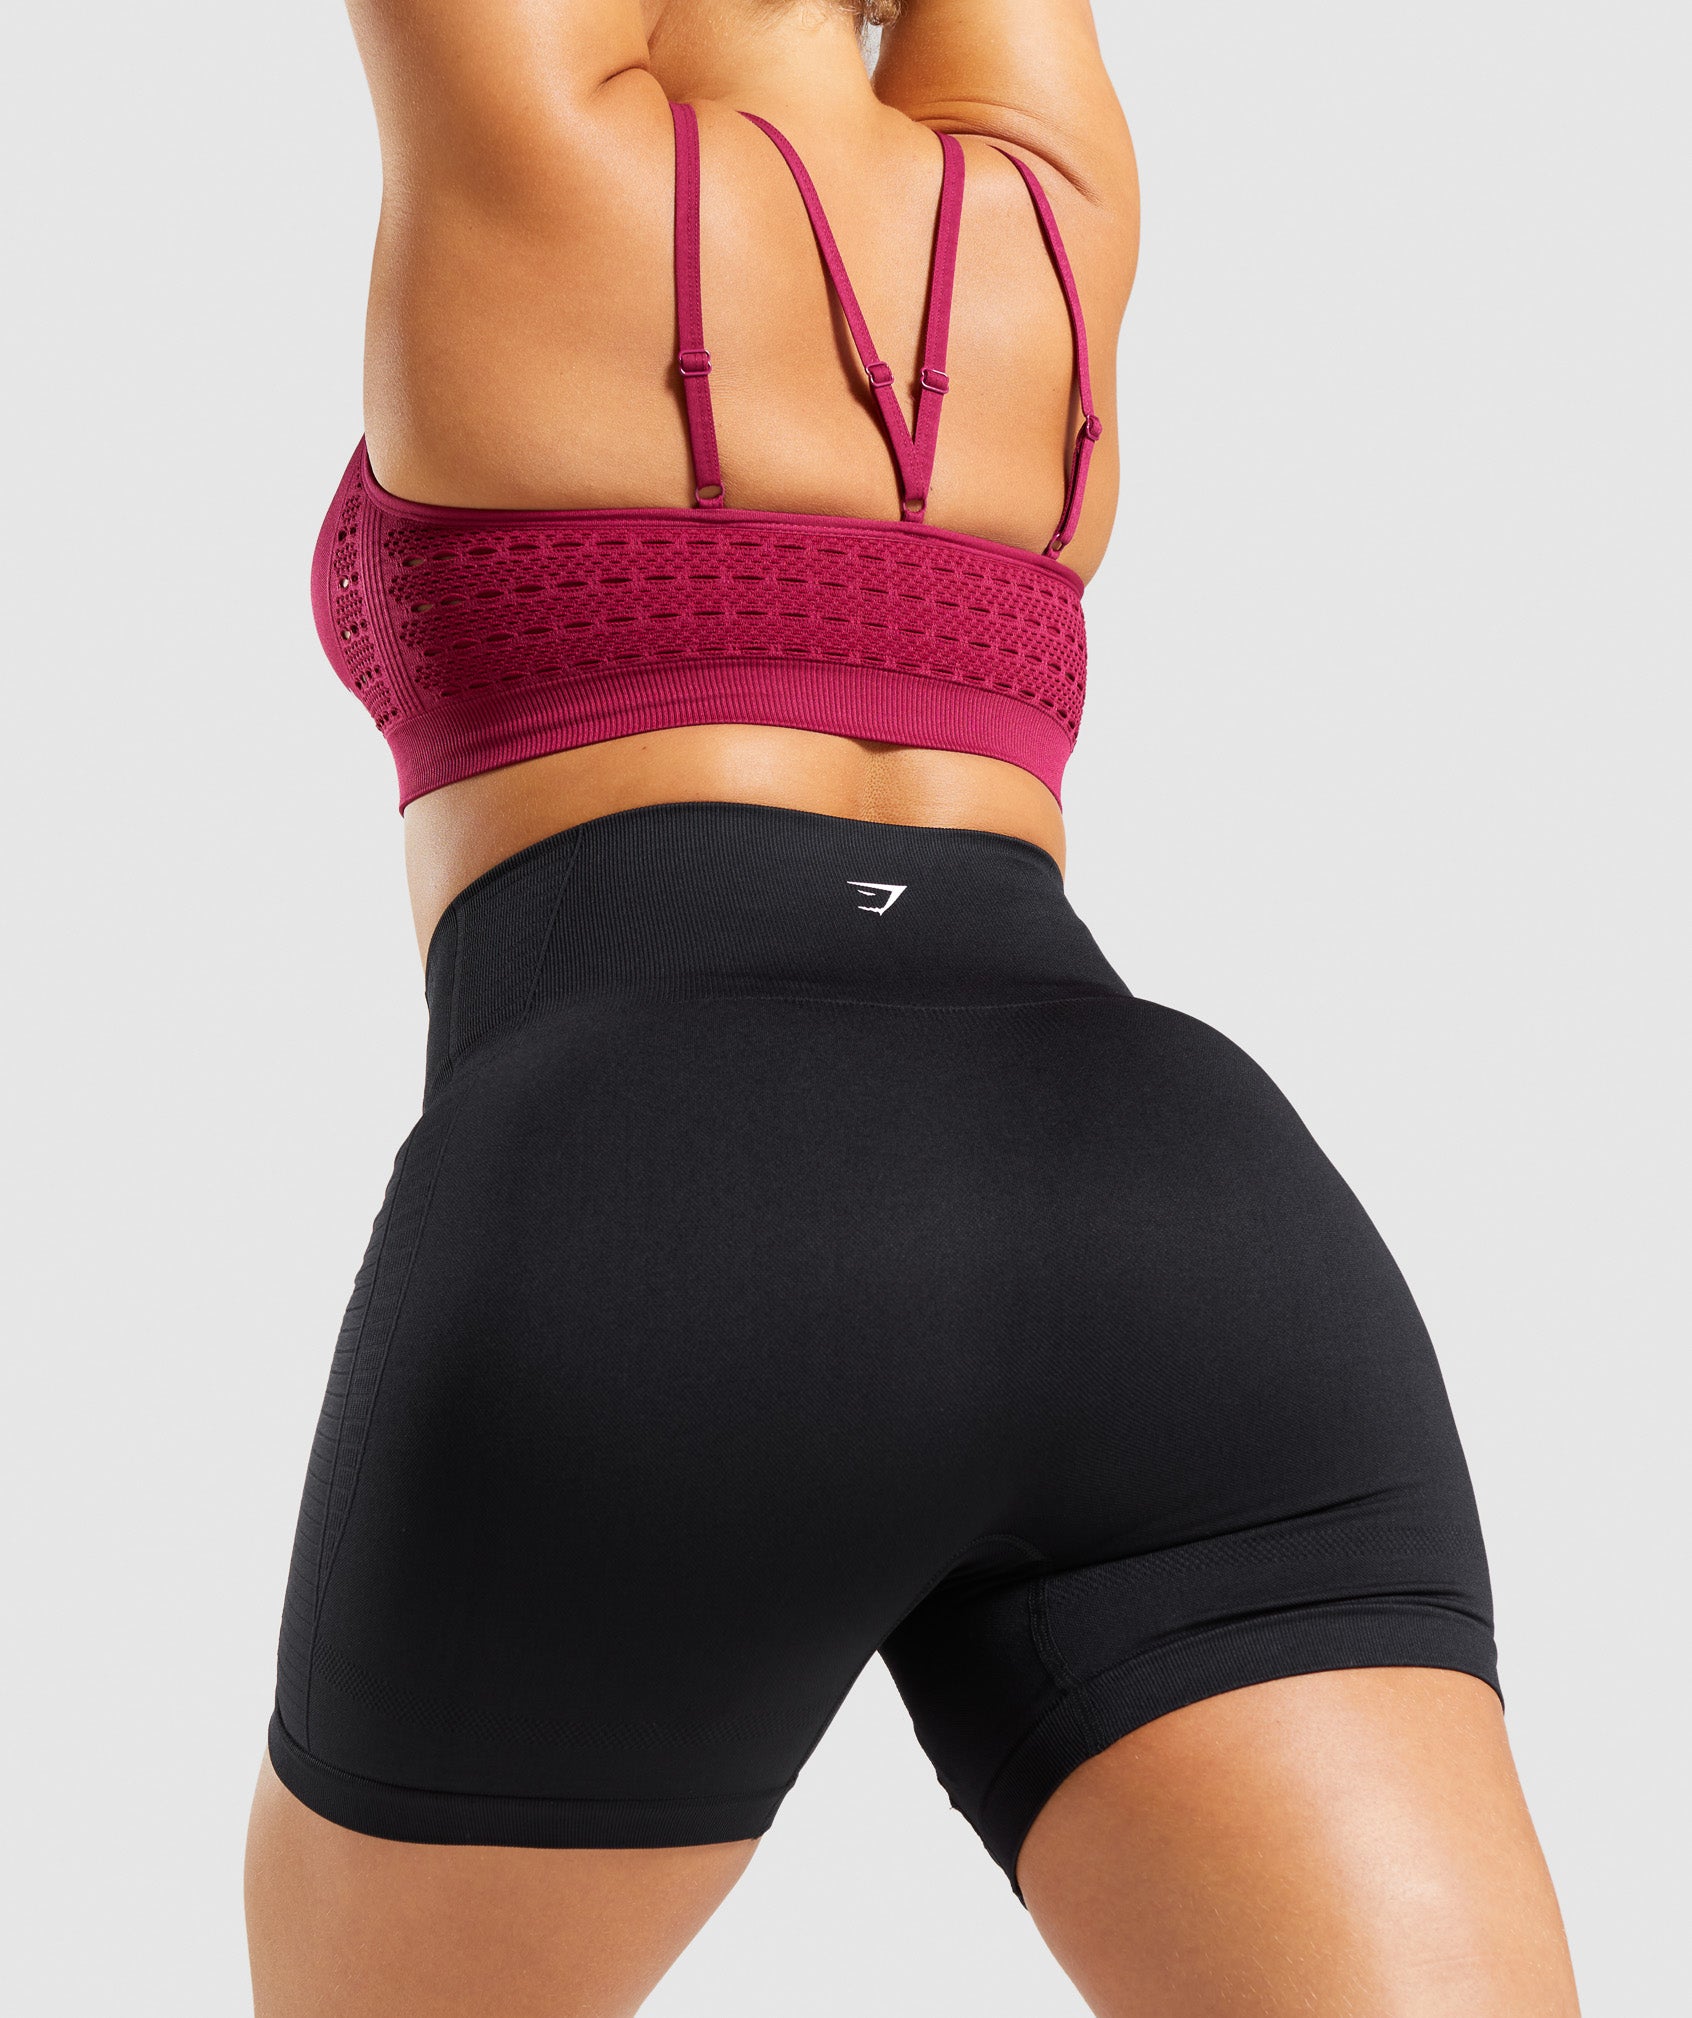 Energy+ Seamless Shorts in Black - view 7